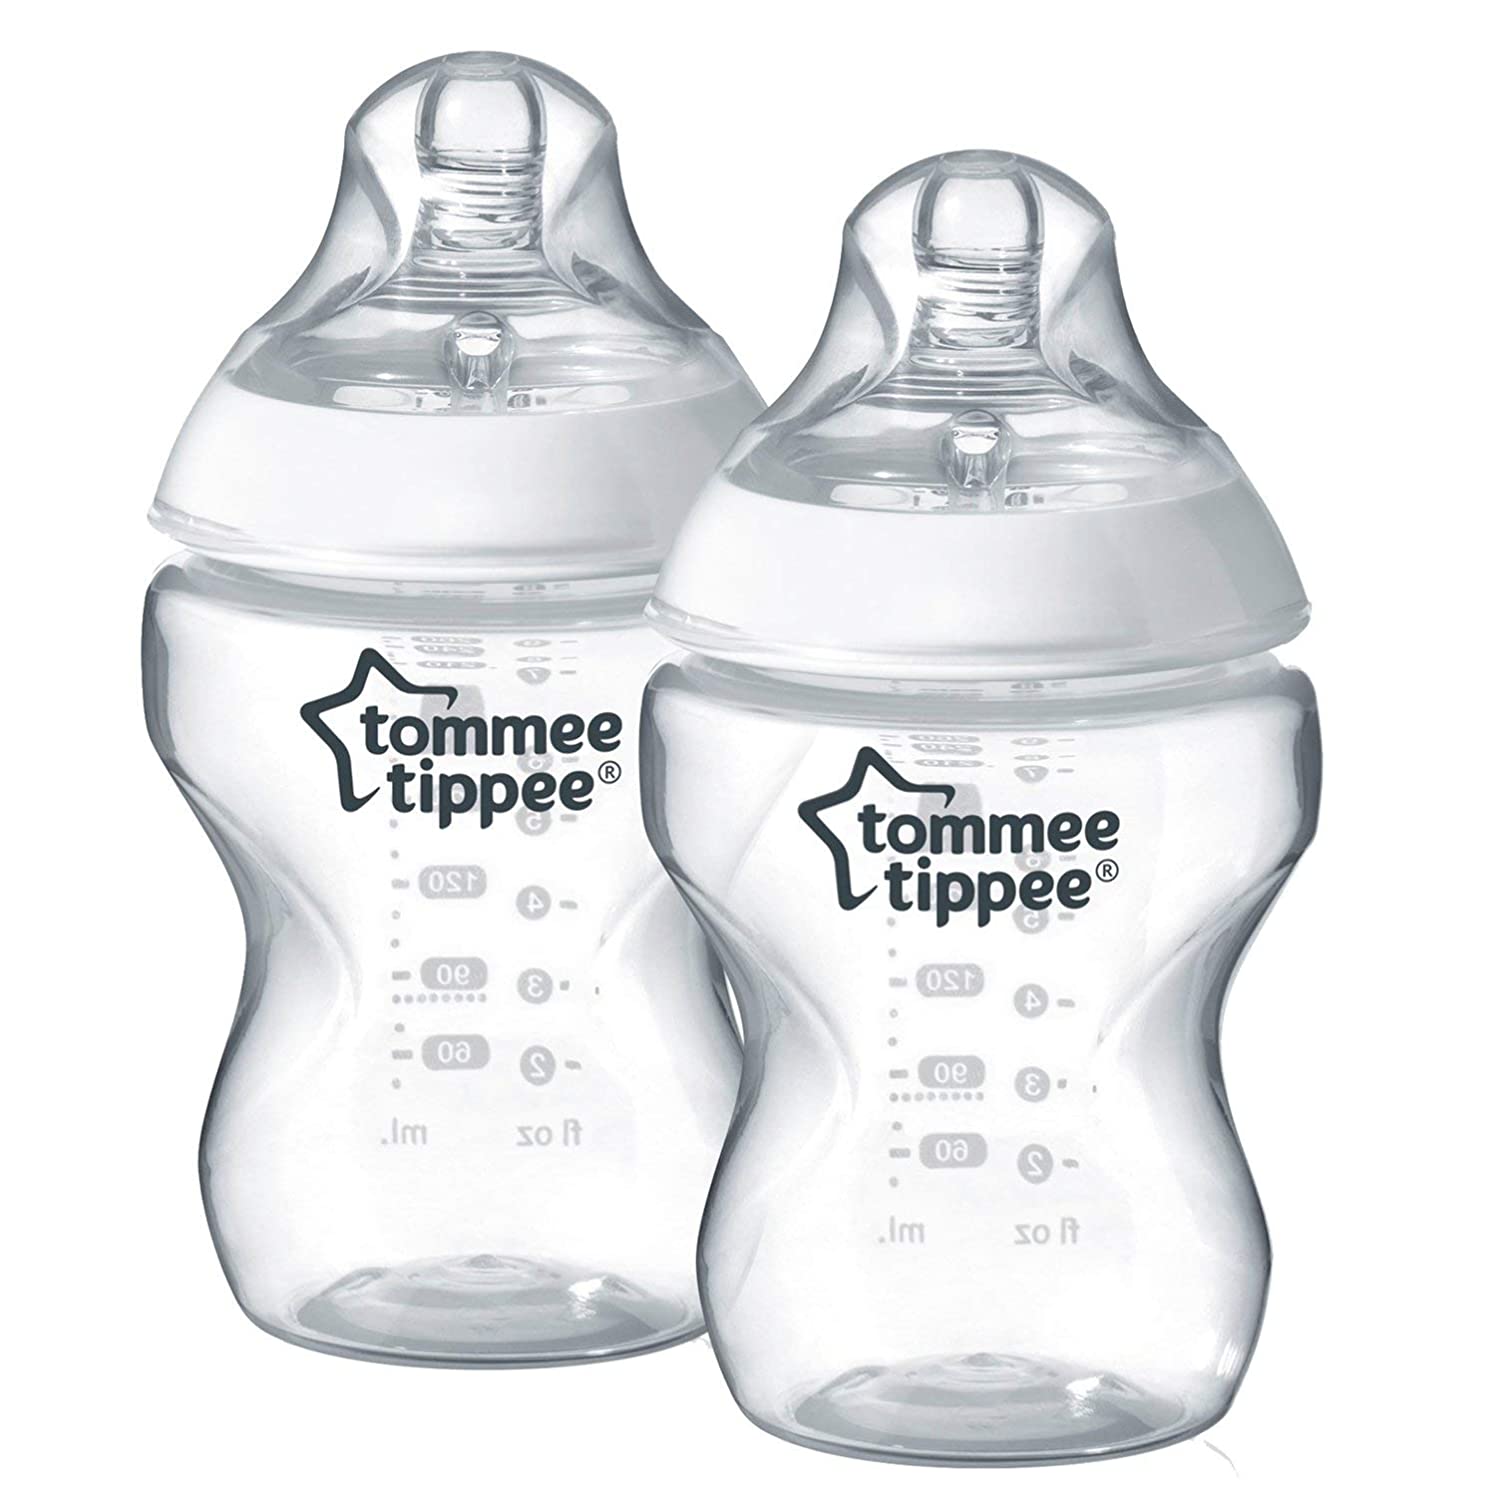 Tommee Tippee Closer to Nature 260 ml/9fl oz Feeding Bottles clear